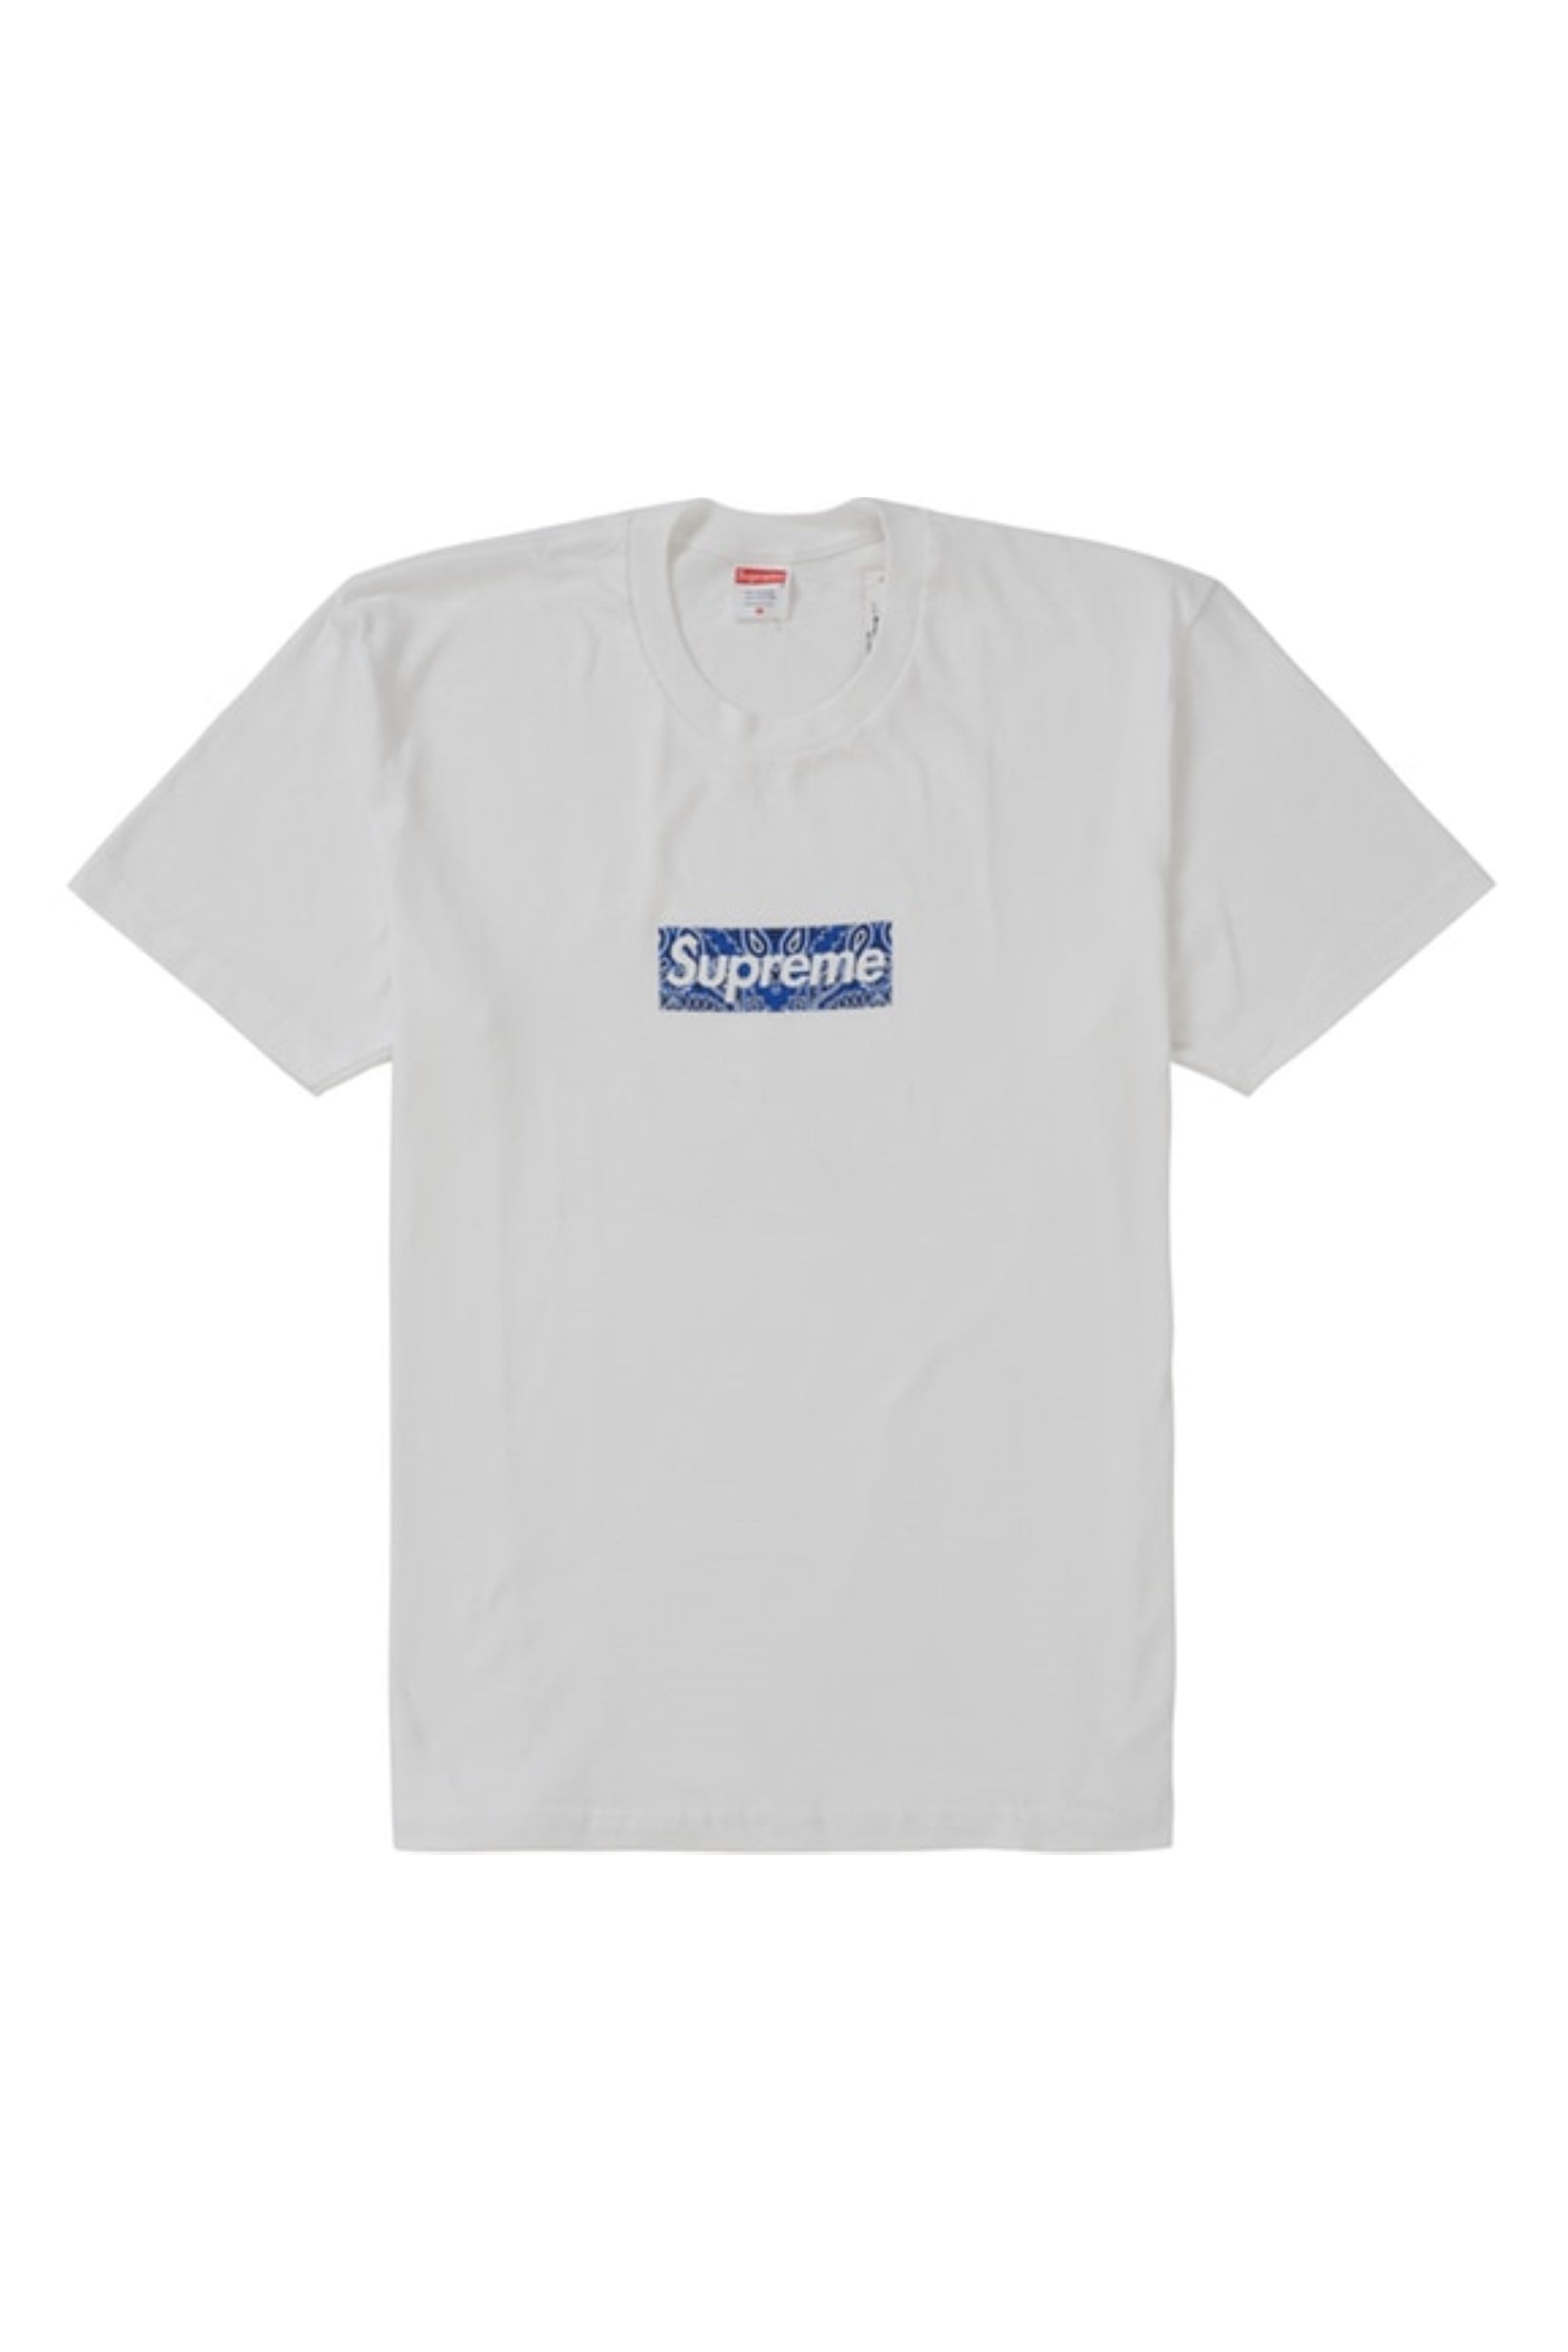 Supreme Shirt Box Logo Price Factory Sale, UP TO 56% OFF | www 